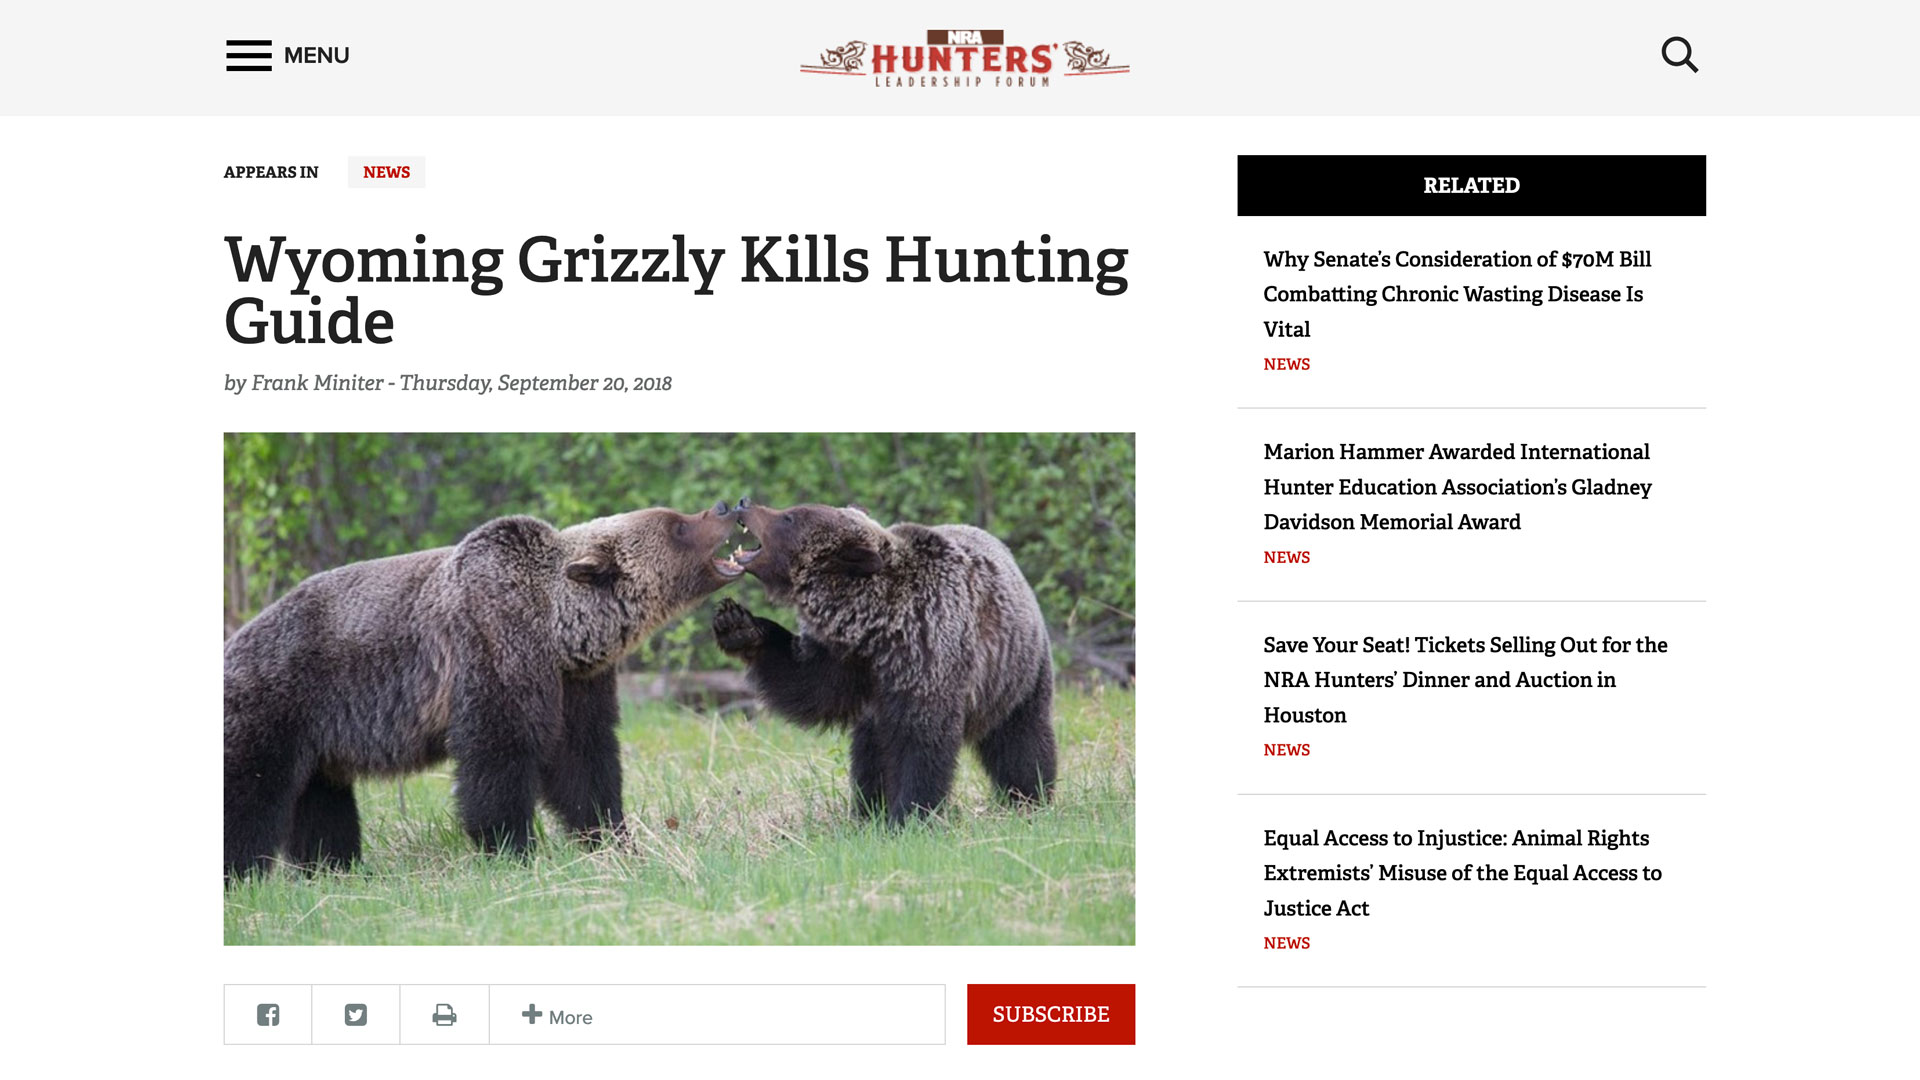 screen grab of nra hlf web page news story regarding grizzly attack in wyoming